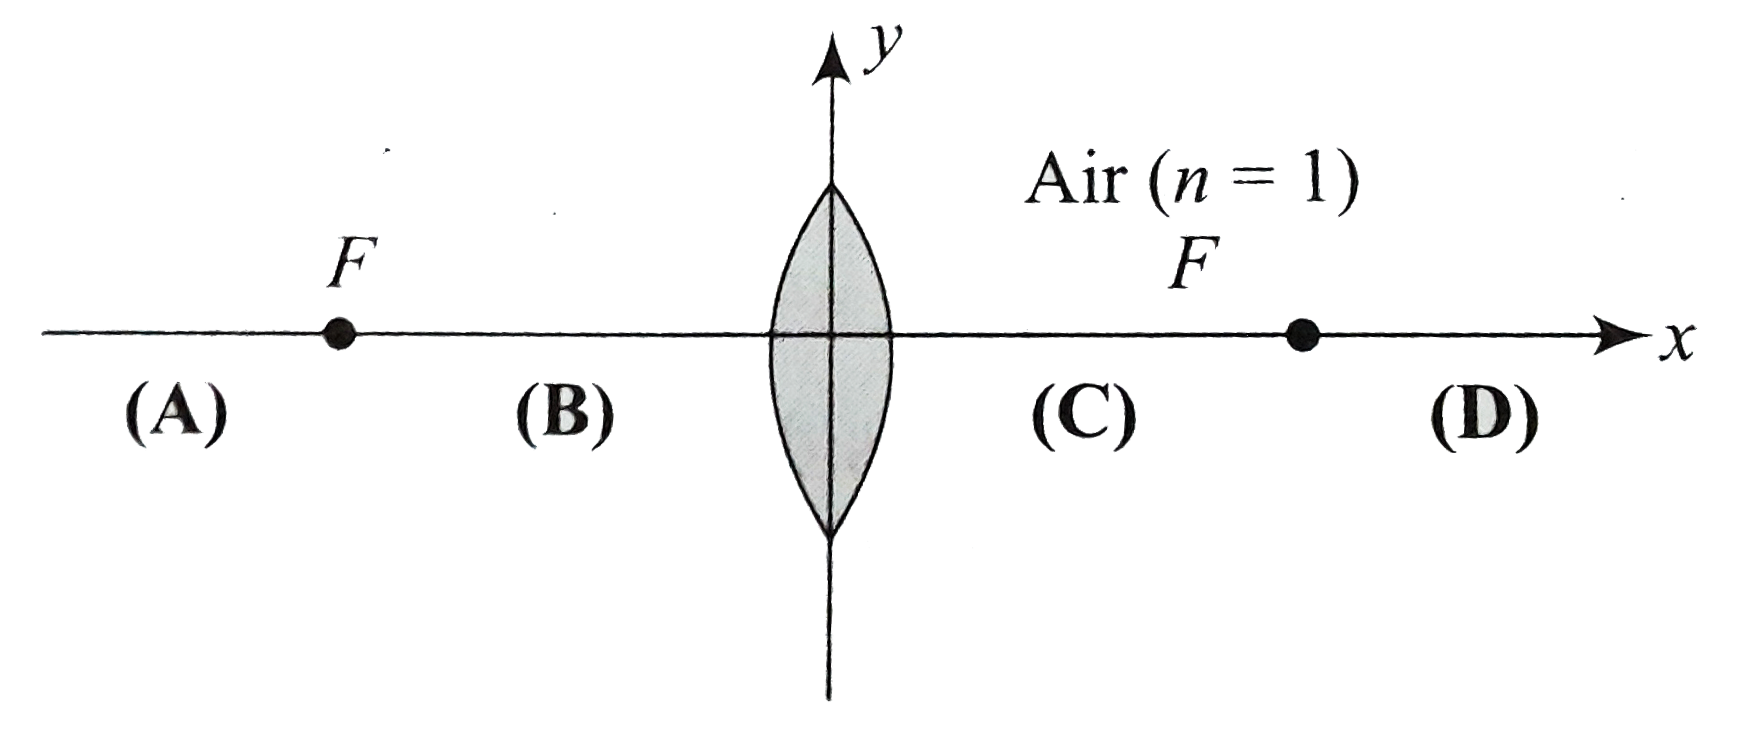 This question concerna a symmetrical lens shown, along with its two focal points. It is made of plastice with n=1.2 and has focal length f. Four different regions are shown:    Here,    A. -oox lt -f    B.  -f lt x lt 0   C. 0 lt x lt f   D. f lt x lt oo      Q. If incident rays are converging, then in which region does the image appear?